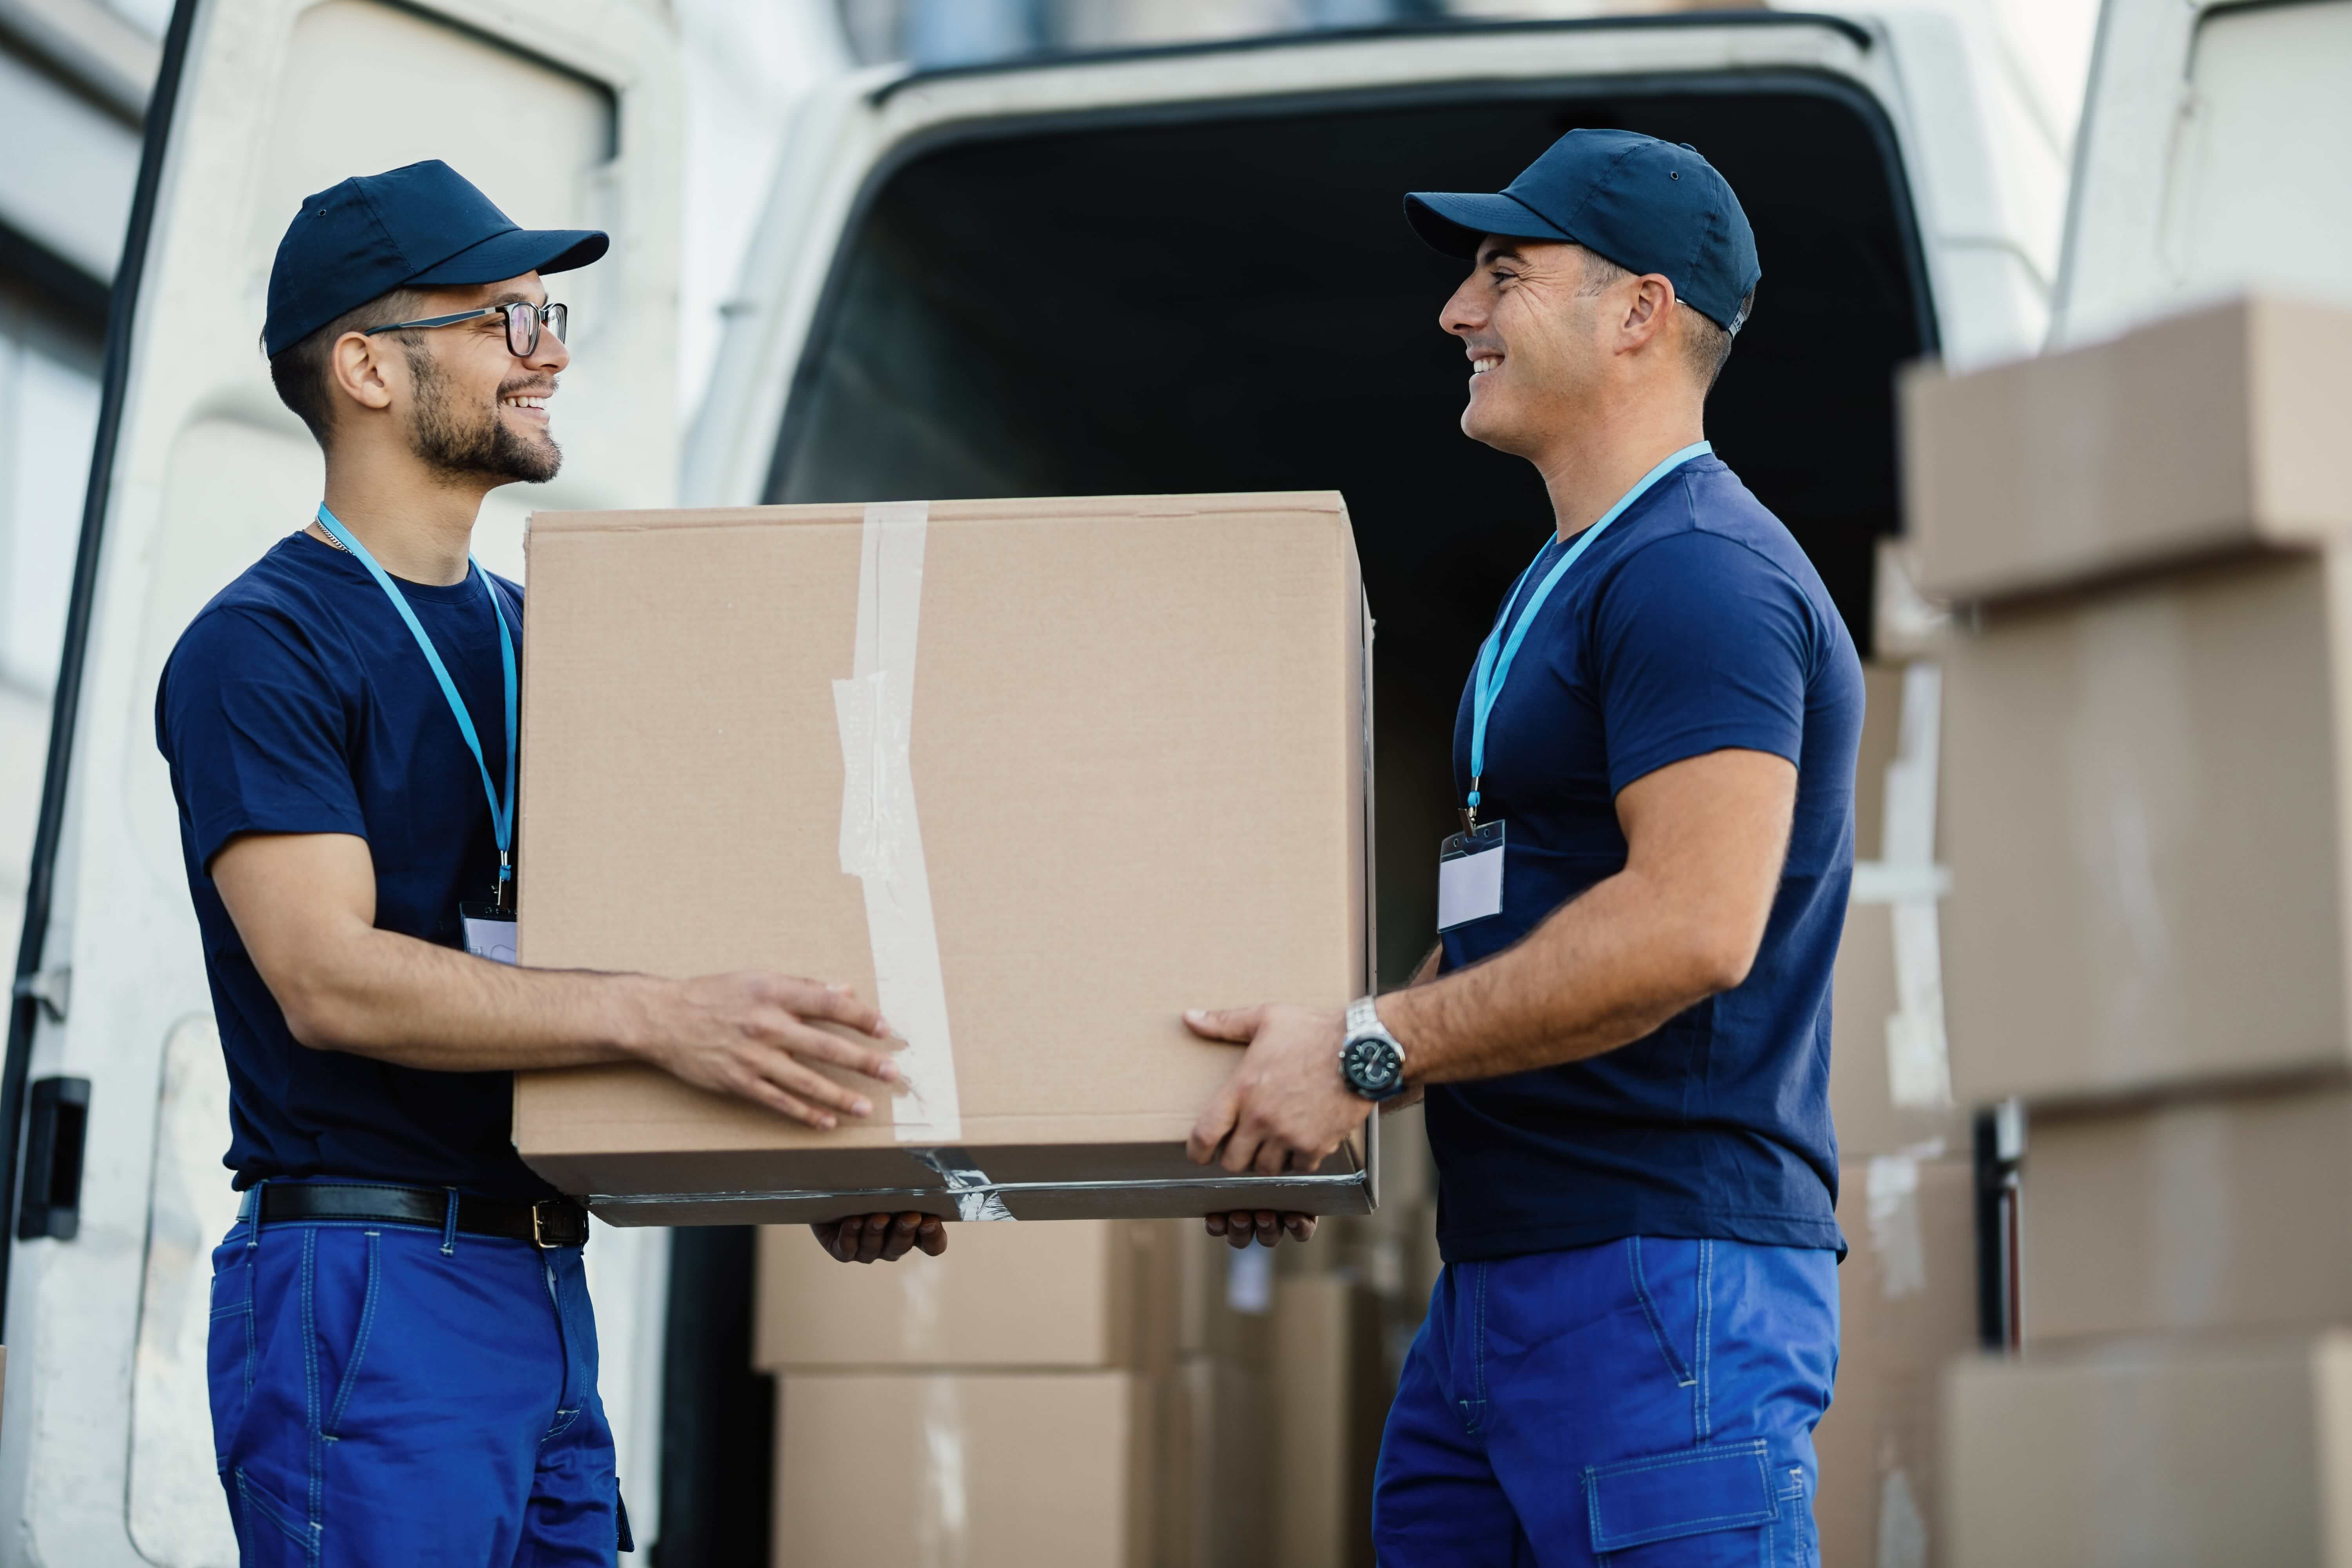 About Royal Sydney Removals Removalist Services